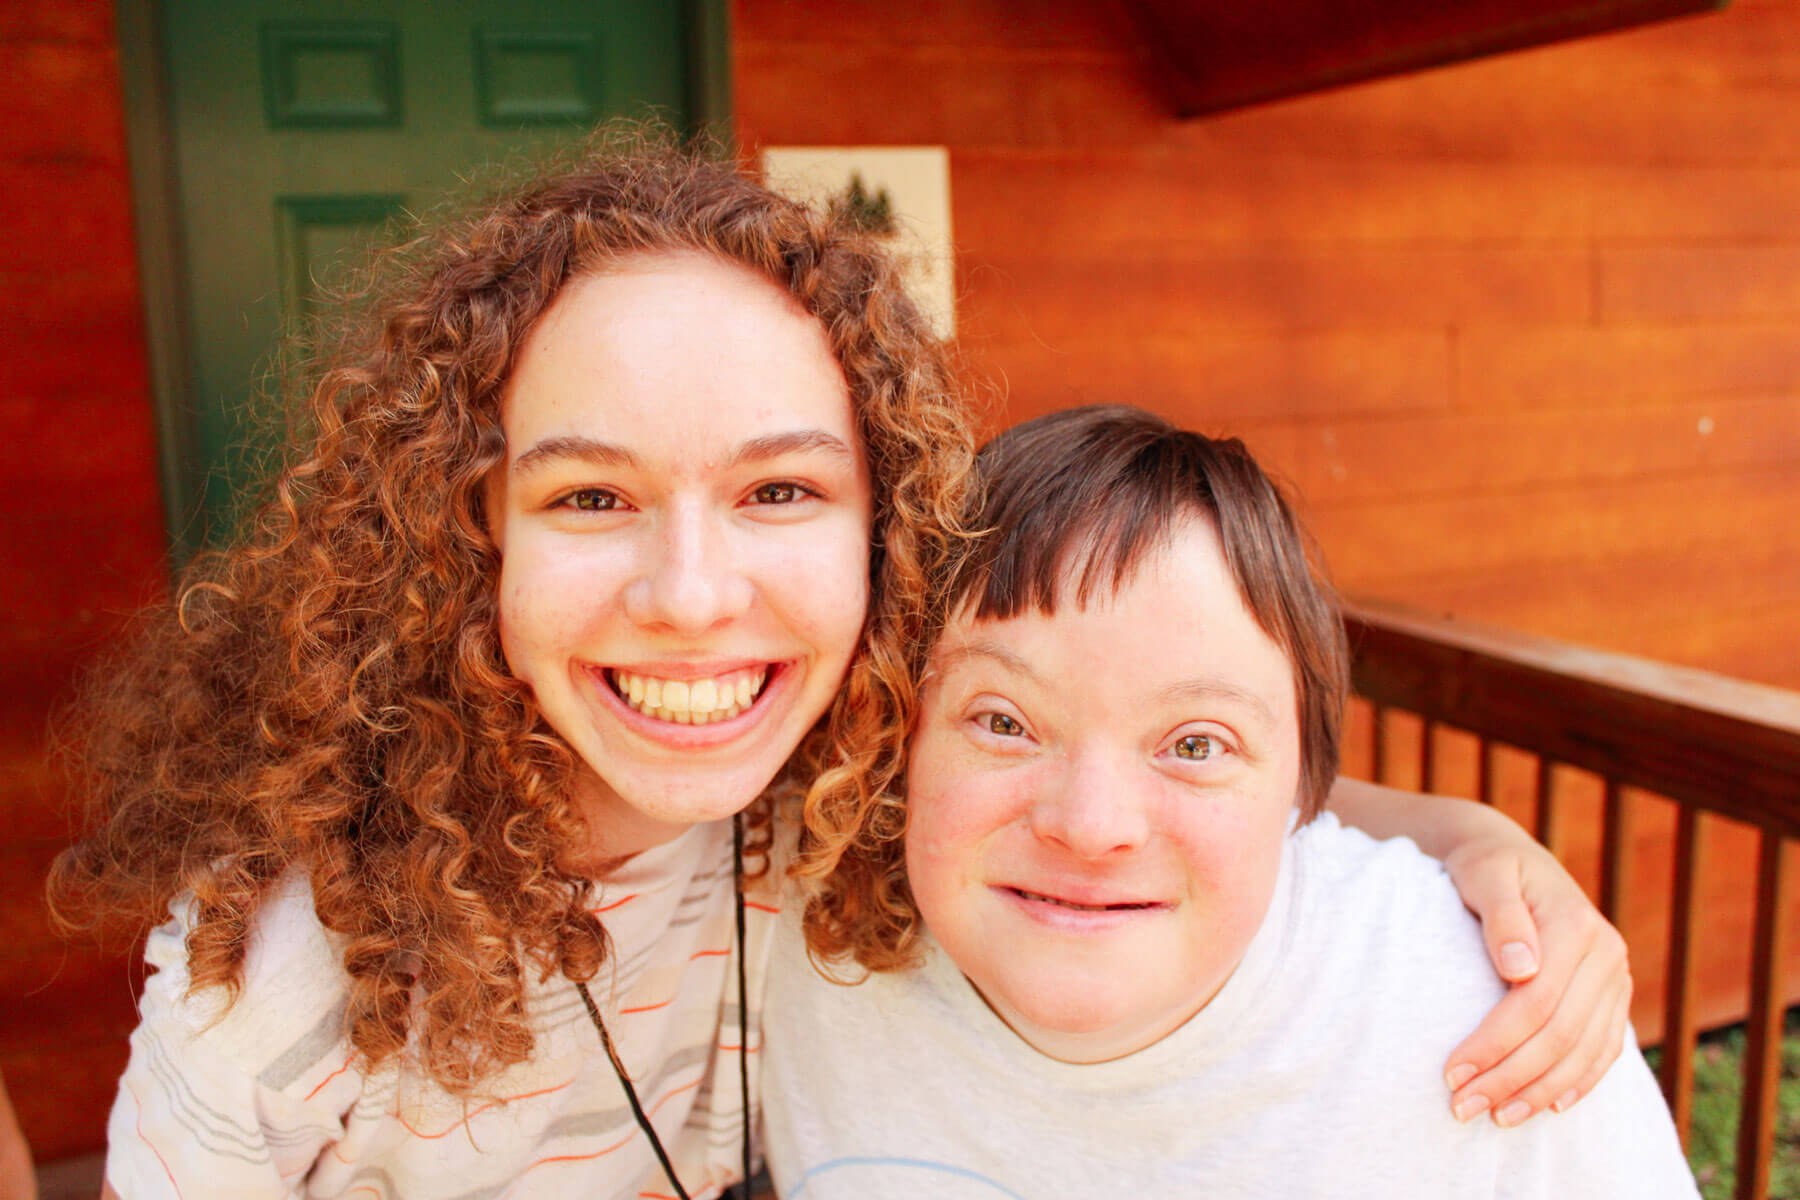 Camper and camp counselor smiling at the camera on a porch